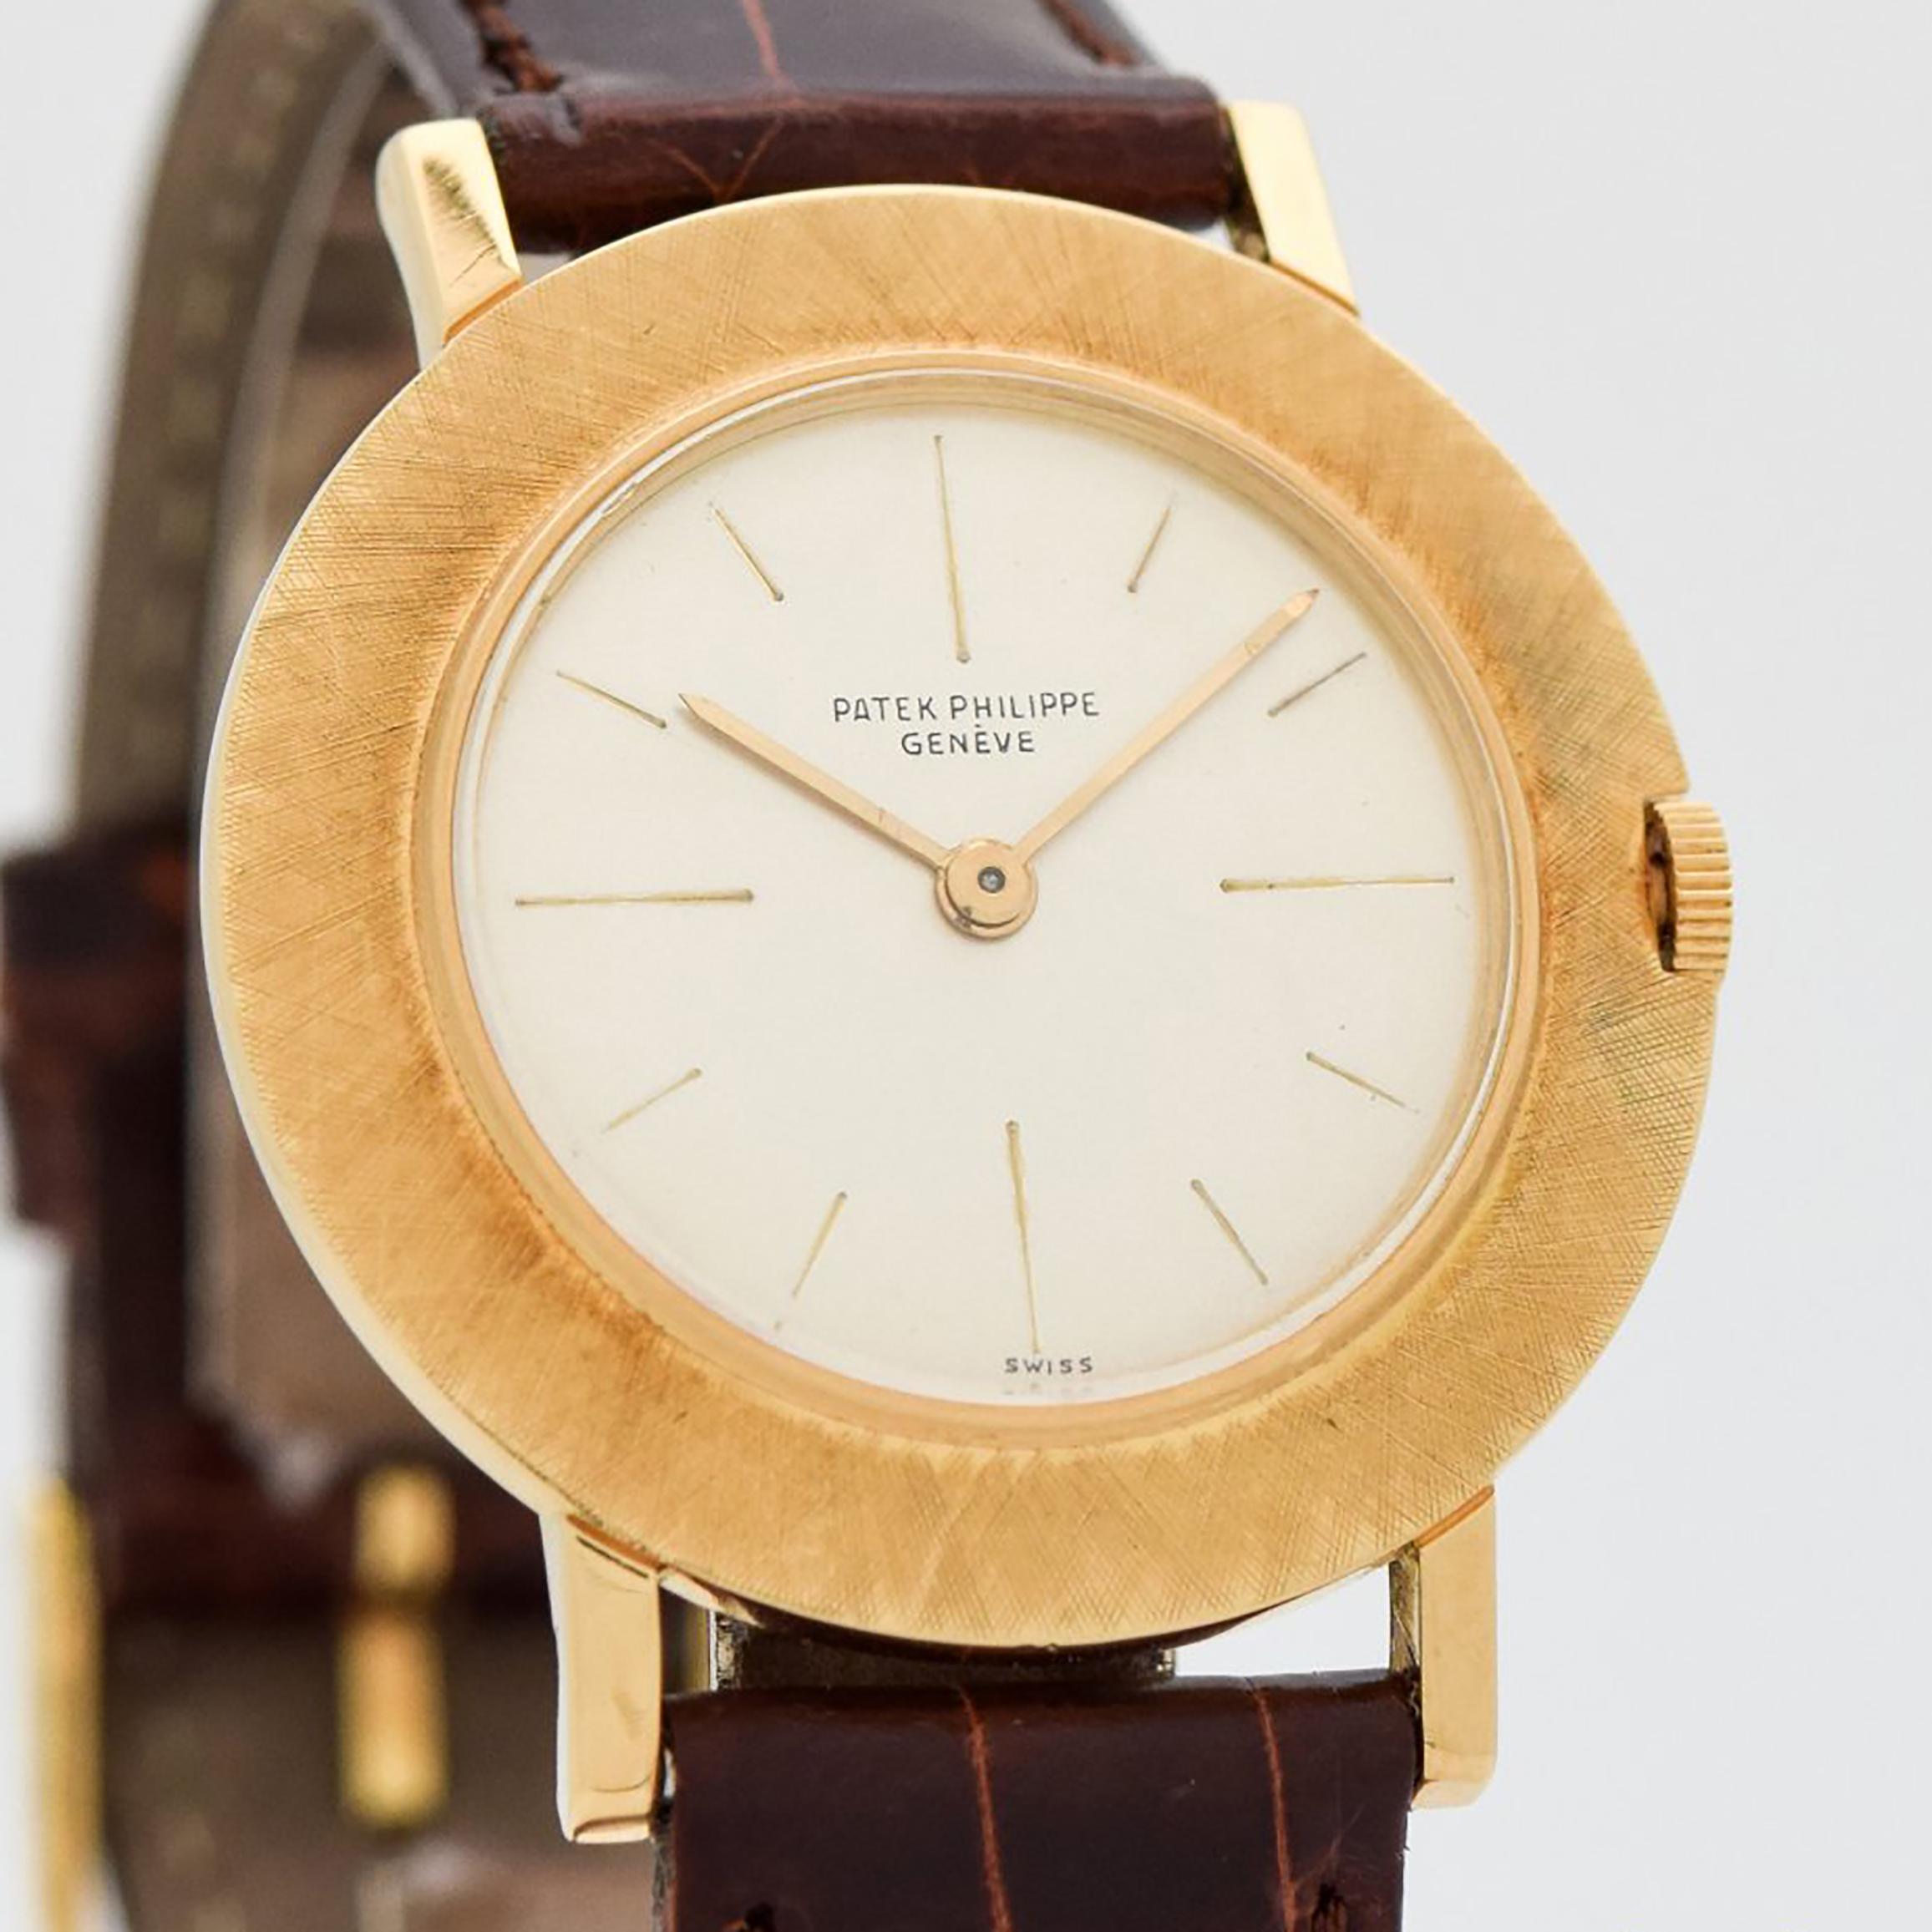 1958 Vintage Patek Philippe Ref. 2594 18k Yellow Gold watch with Silver Dial with Recessed Stick Markers with Patek Philippe Extract From The Archives Document. 32mm x 37mm lug to lug (1.26 in. x 1.46 in.) - 18 jewel, manual caliber movement. Triple